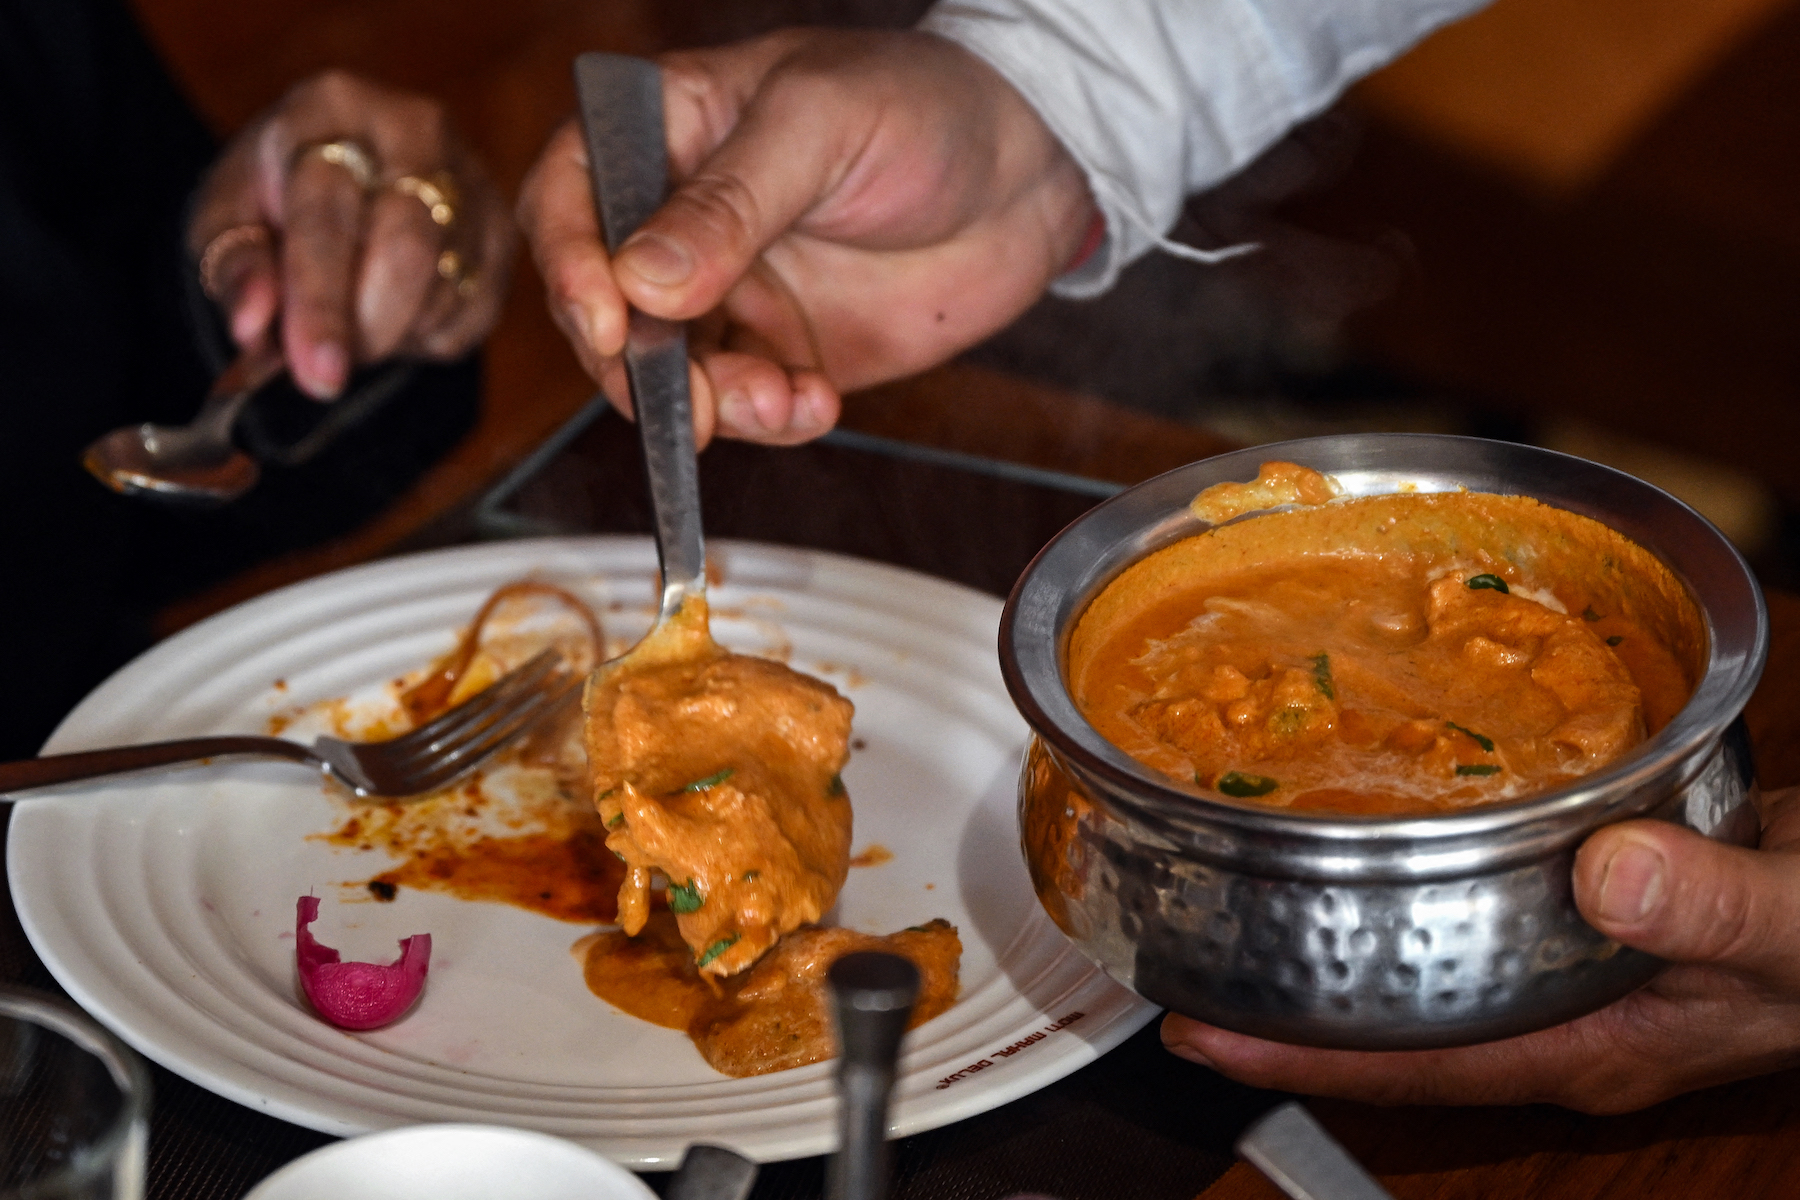 Two Restaurants In India Are Fighting Over Who Invented Butter Chicken And Now It’s Gone To Delhi’s High Court